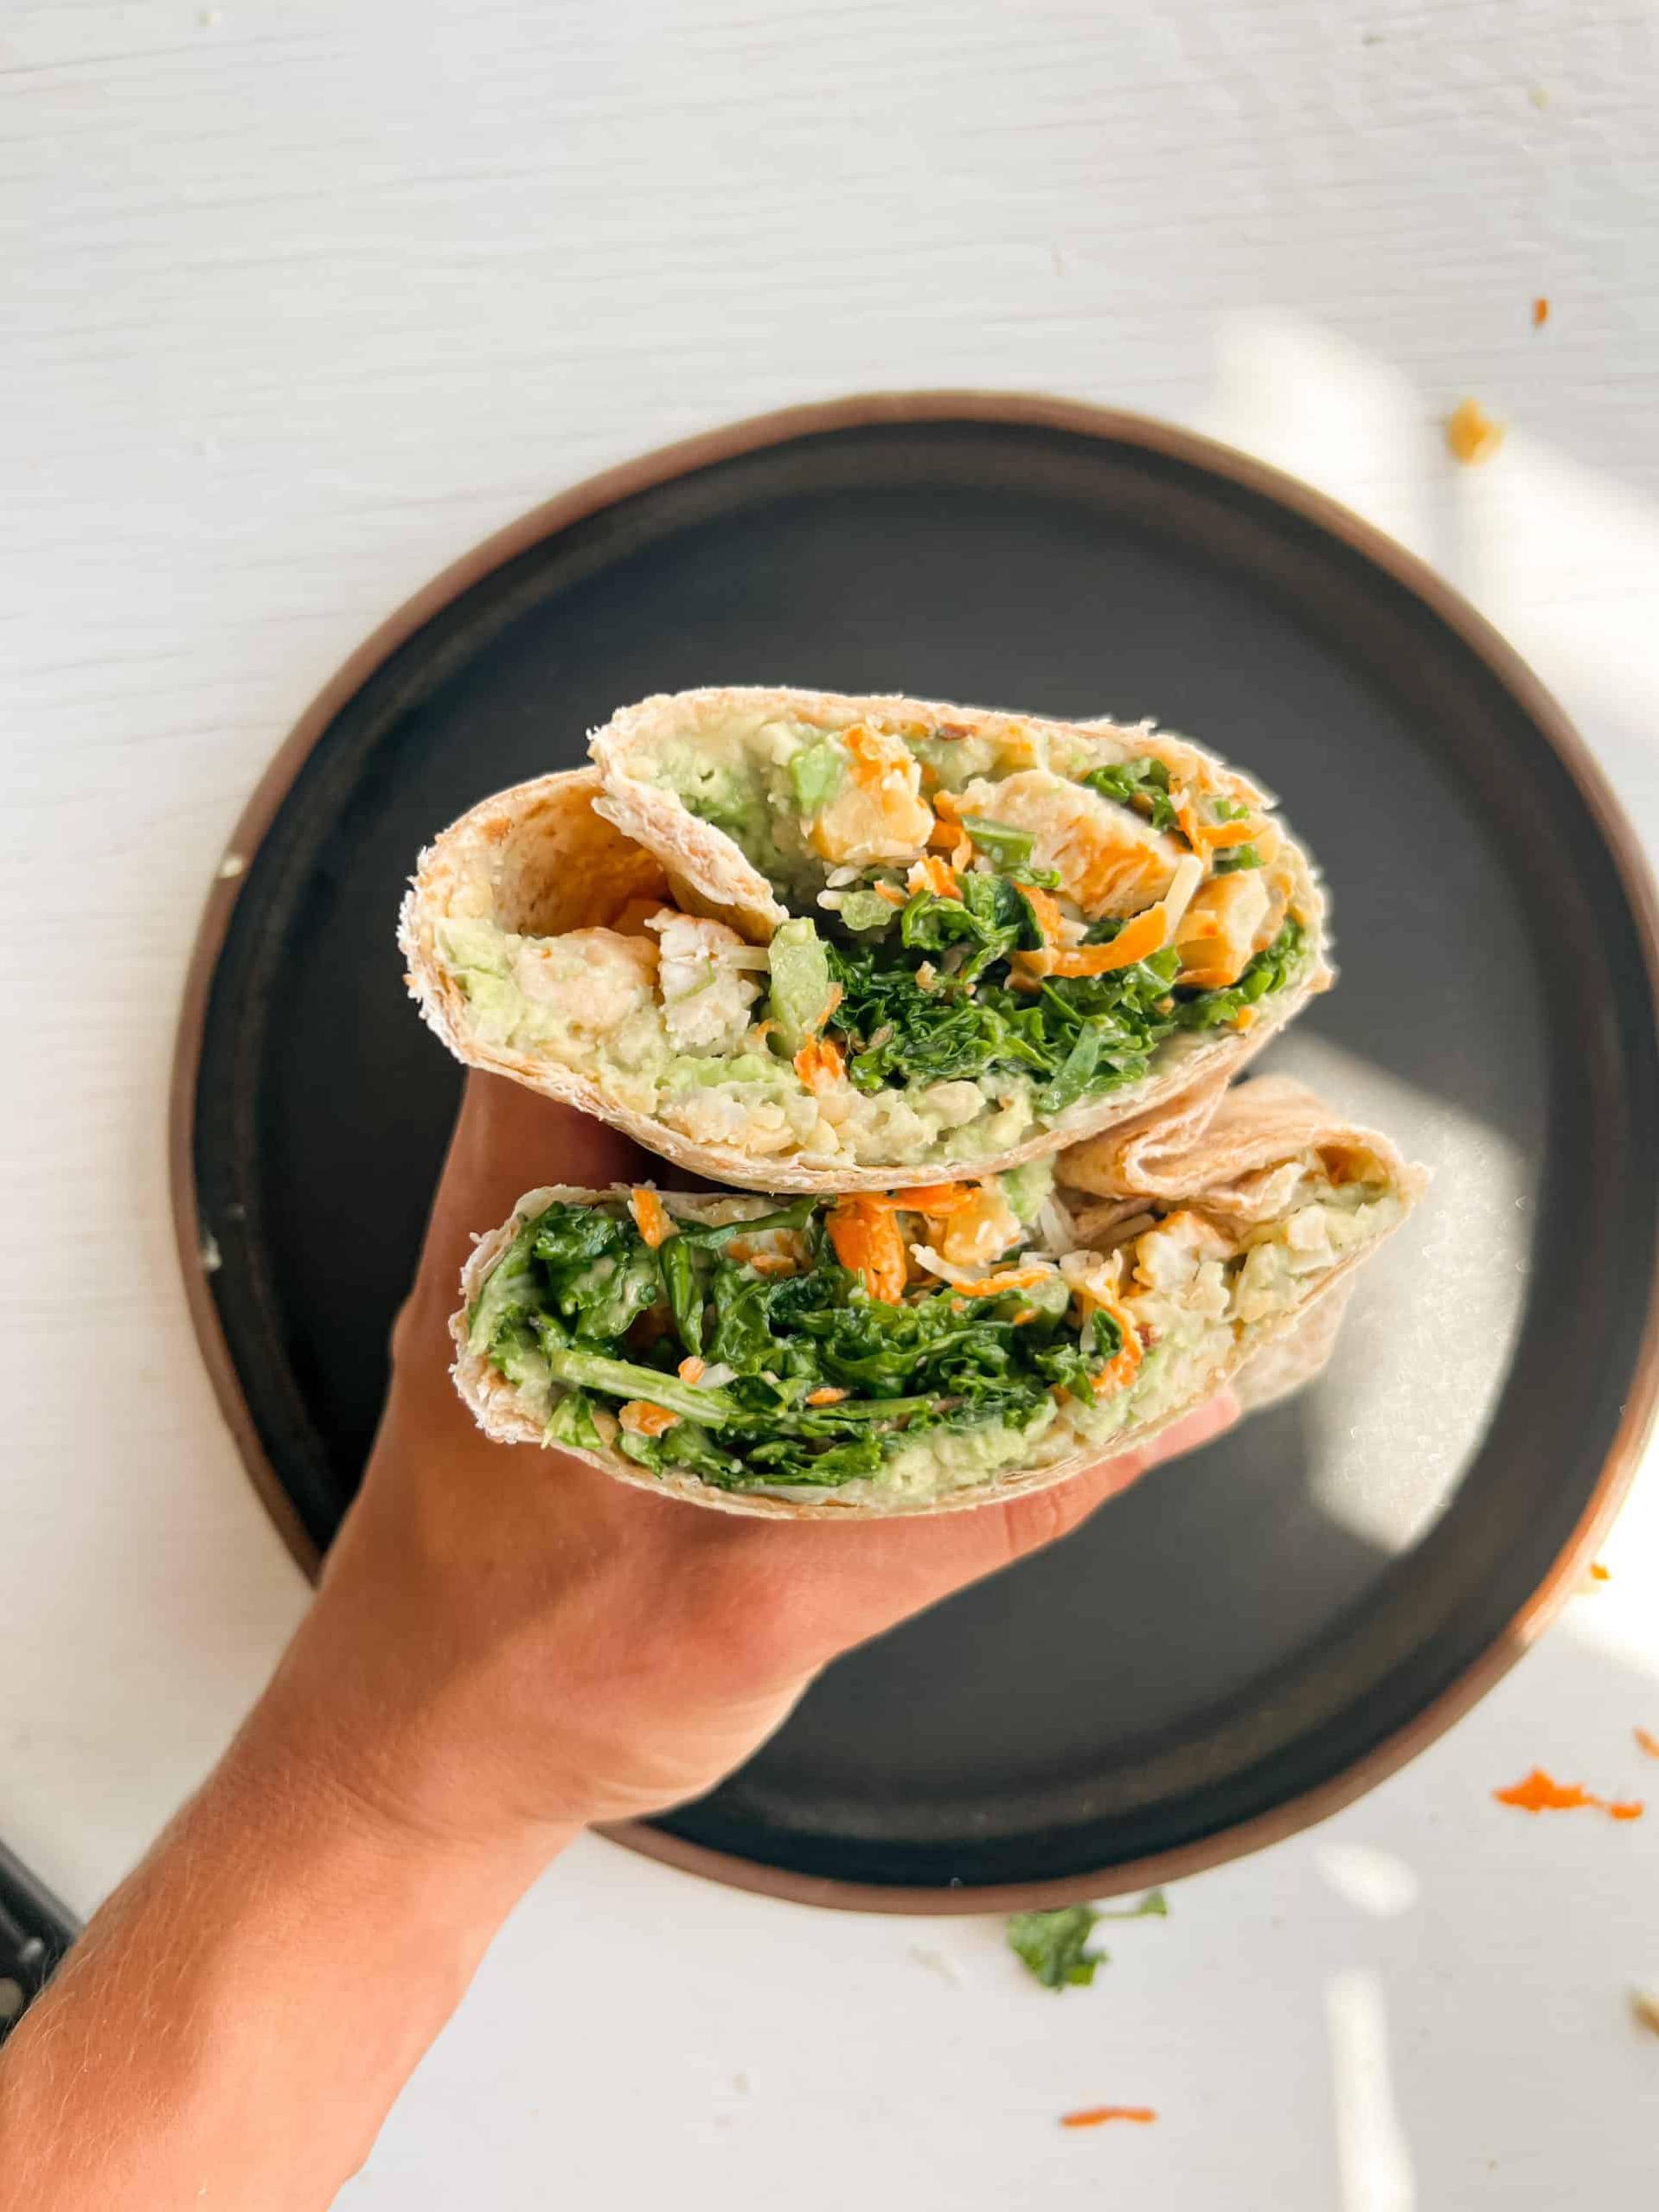  Who says healthy food can't be fun? Try this delicious and gluten-free wrap bursting with flavor.